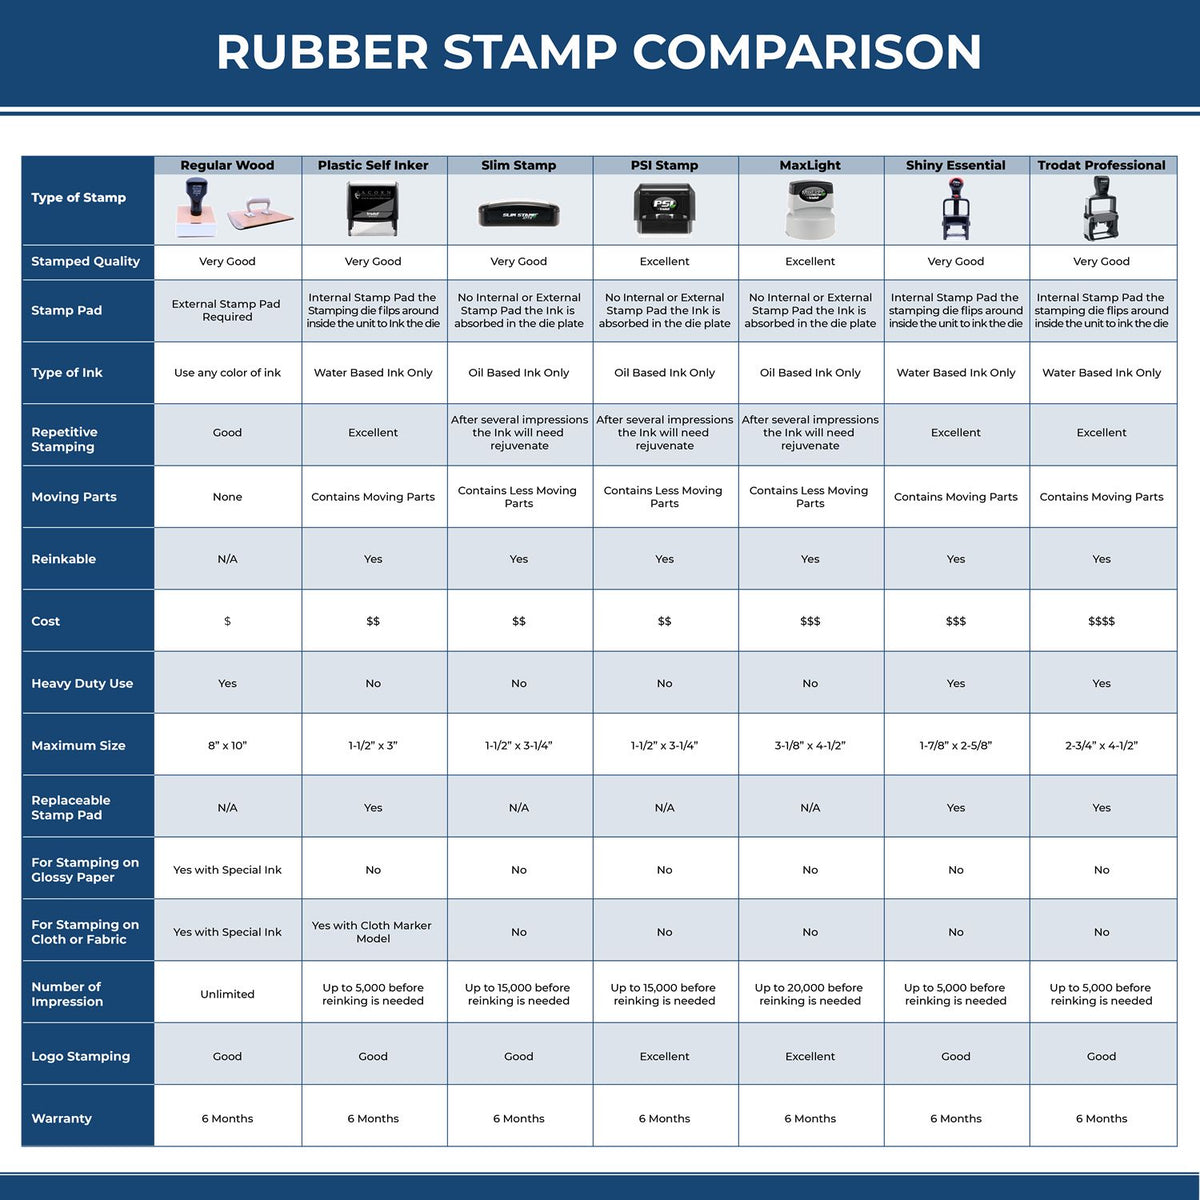 Large Self-Inking Economy Rate Stamp 4851S Rubber Stamp Comparison